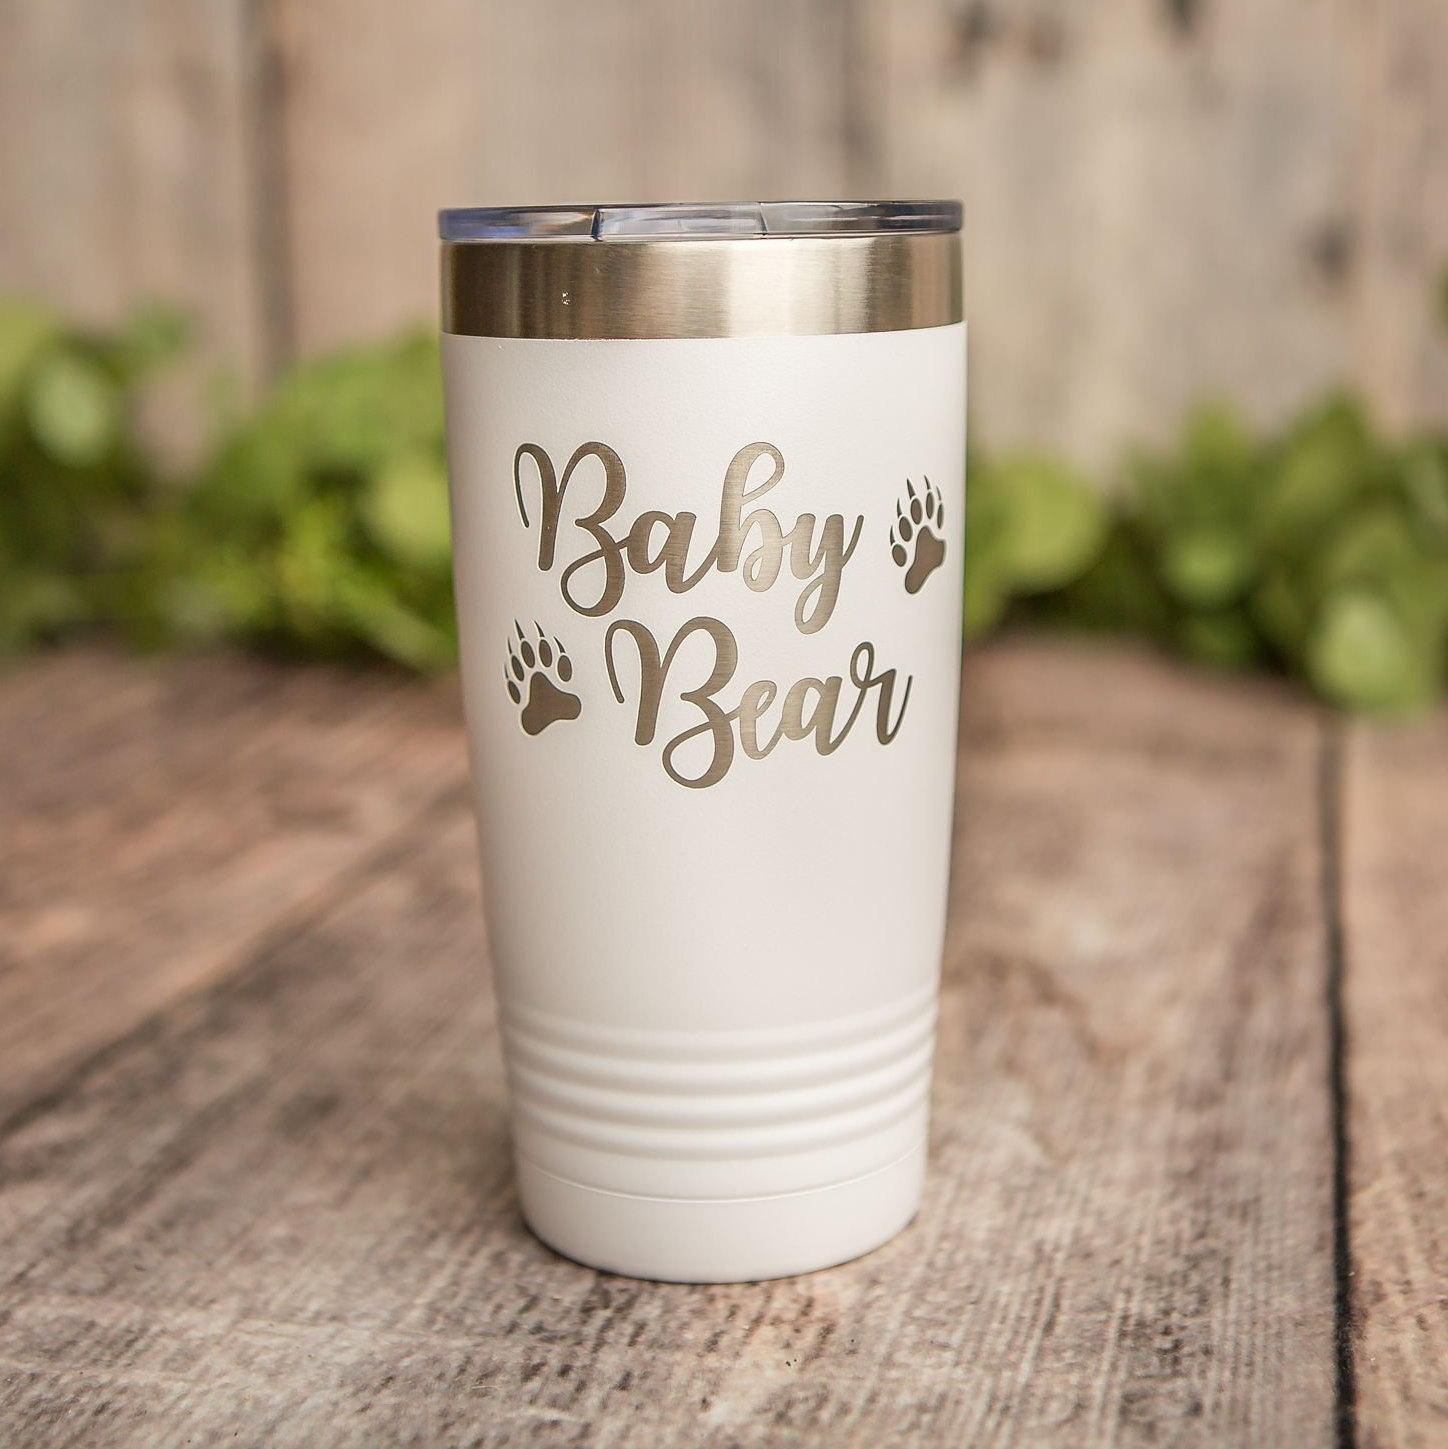 https://3cetching.com/wp-content/uploads/2020/09/baby-bear-engraved-stainless-steel-tumbler-yeti-style-cup-baby-bear-mug-5f5fac47.jpg